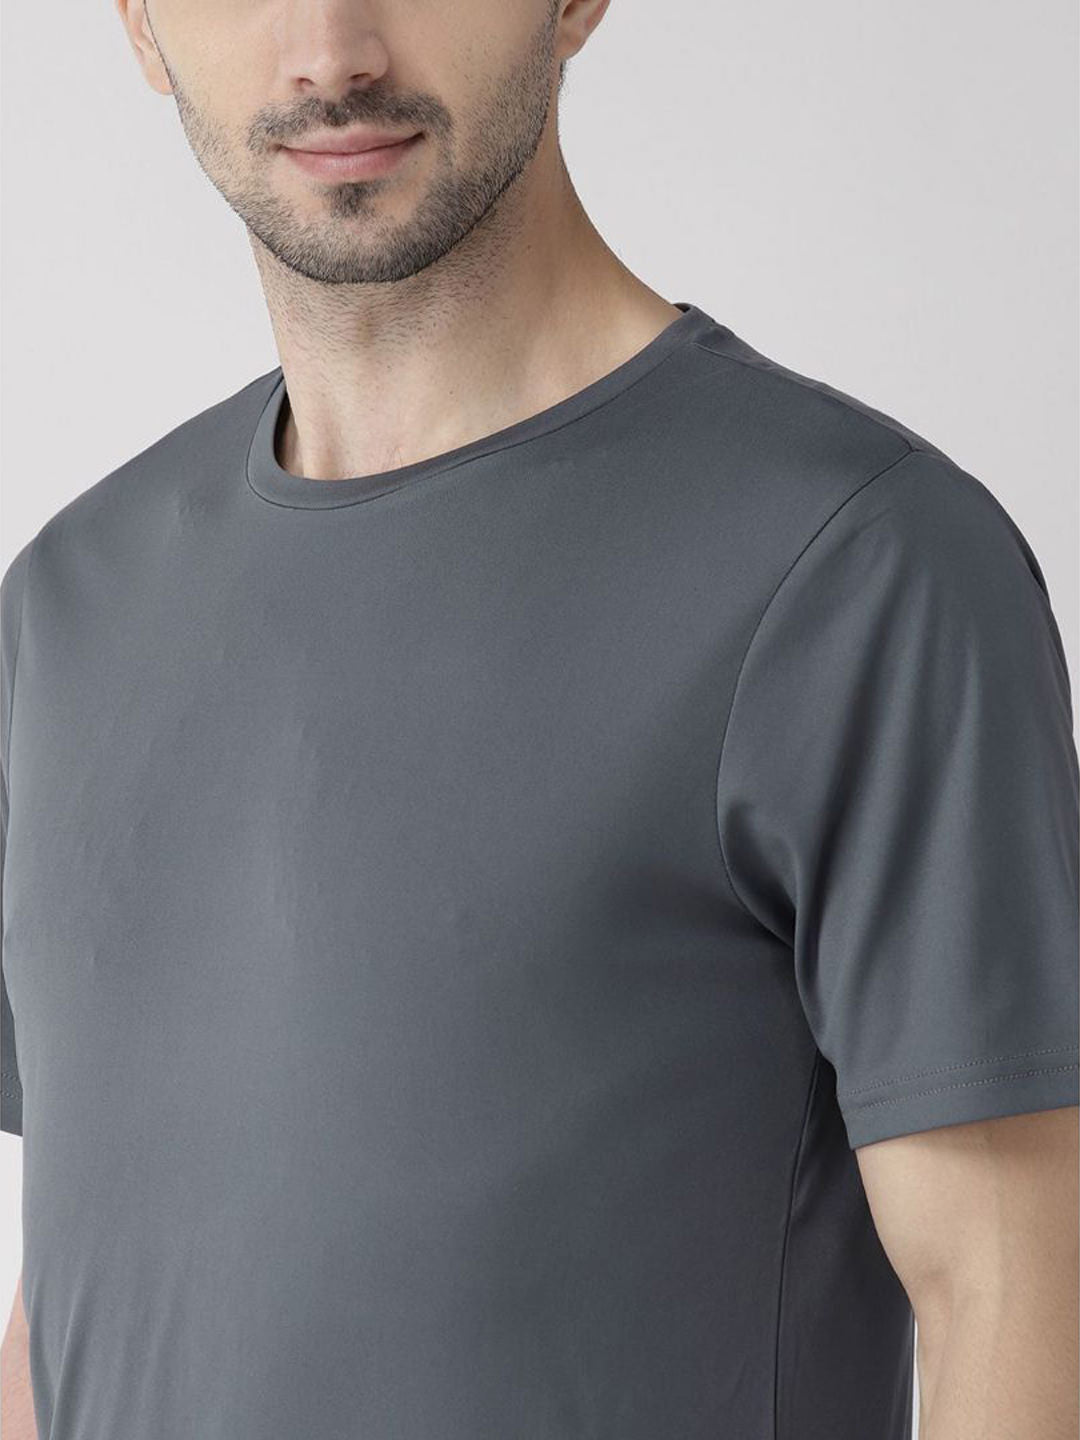 Alcis Men Charcoal Grey Slim Fit Solid Round Neck T-shirt